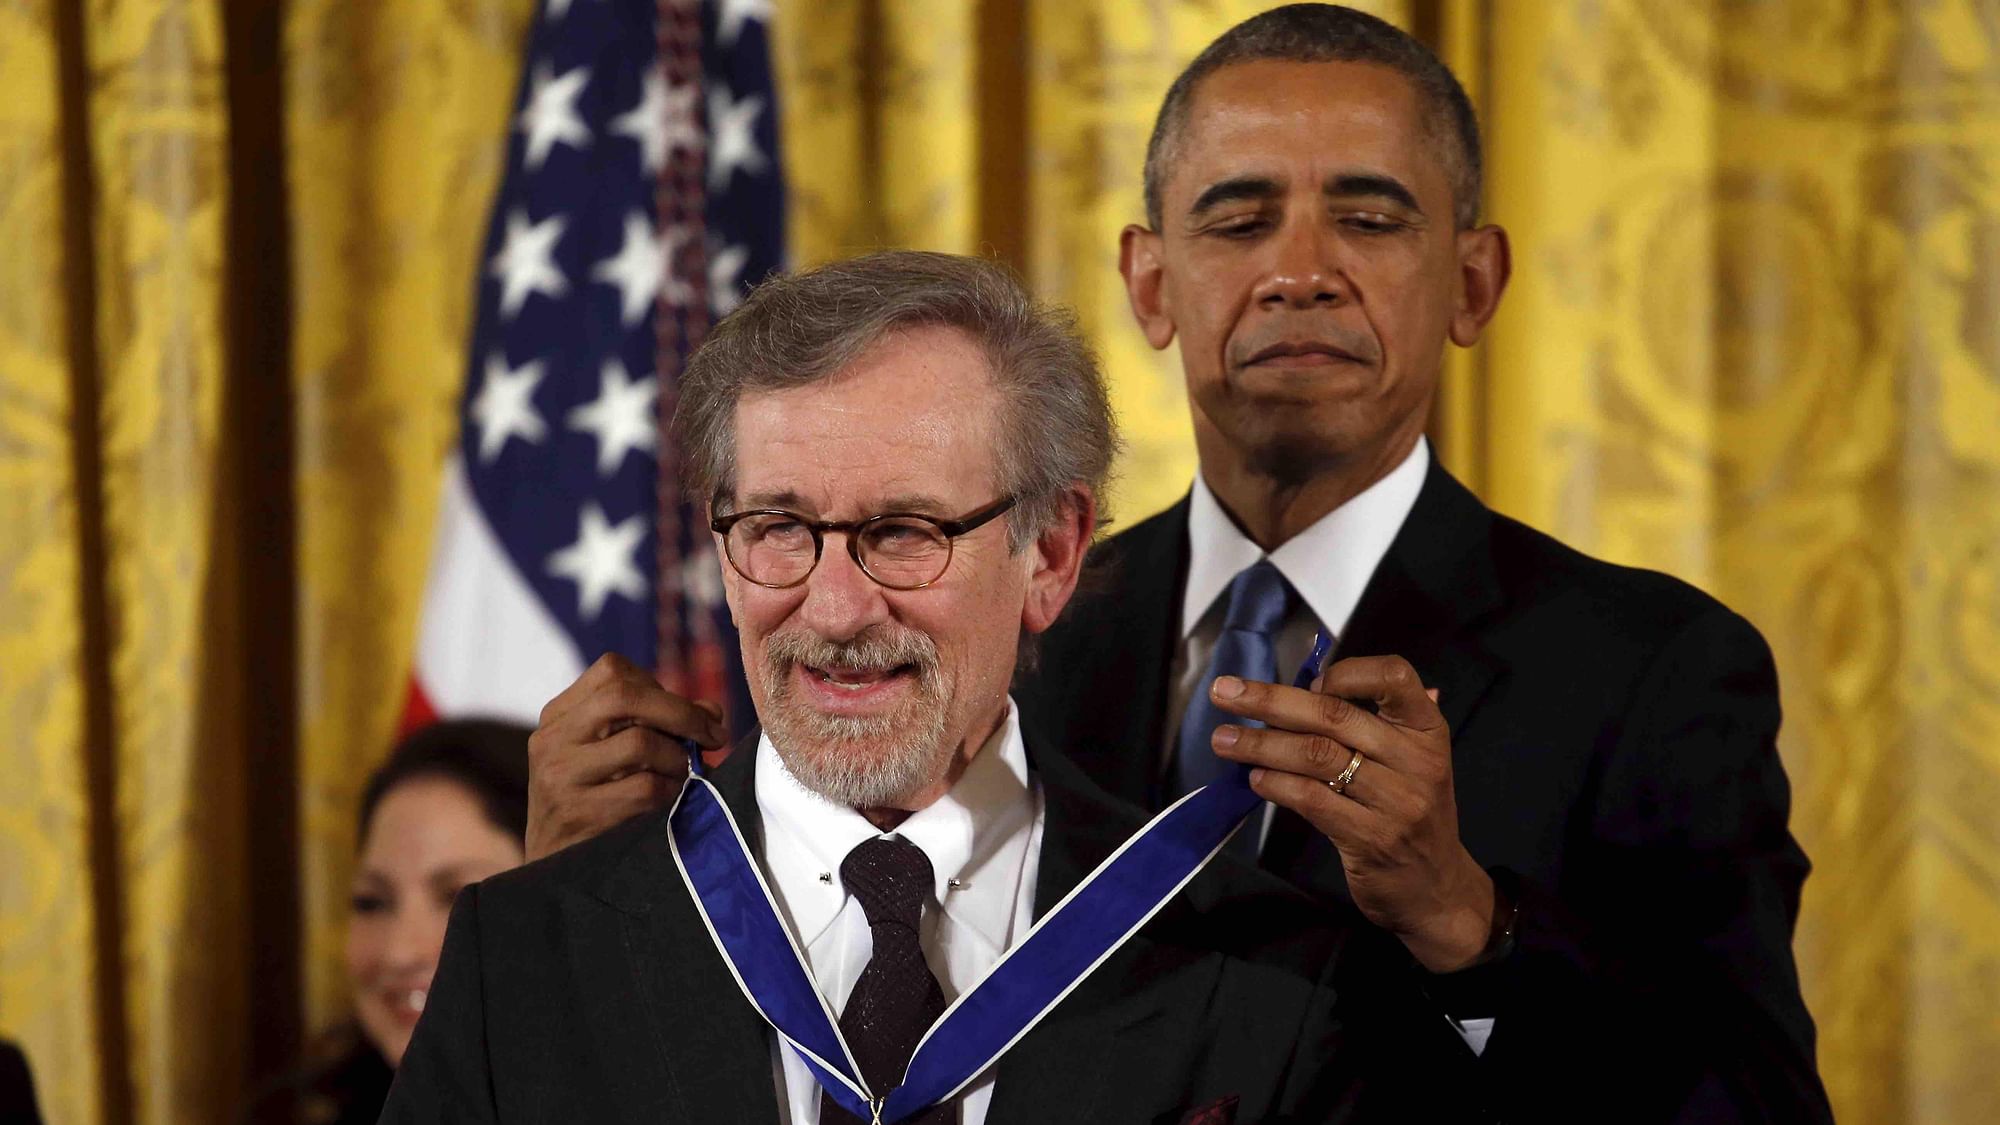 US President Barack Obama presents the Presidential Medal of Freedom to film director Steven Spielberg during an event in the East Room of the White House in Washington on November 24, 2015.